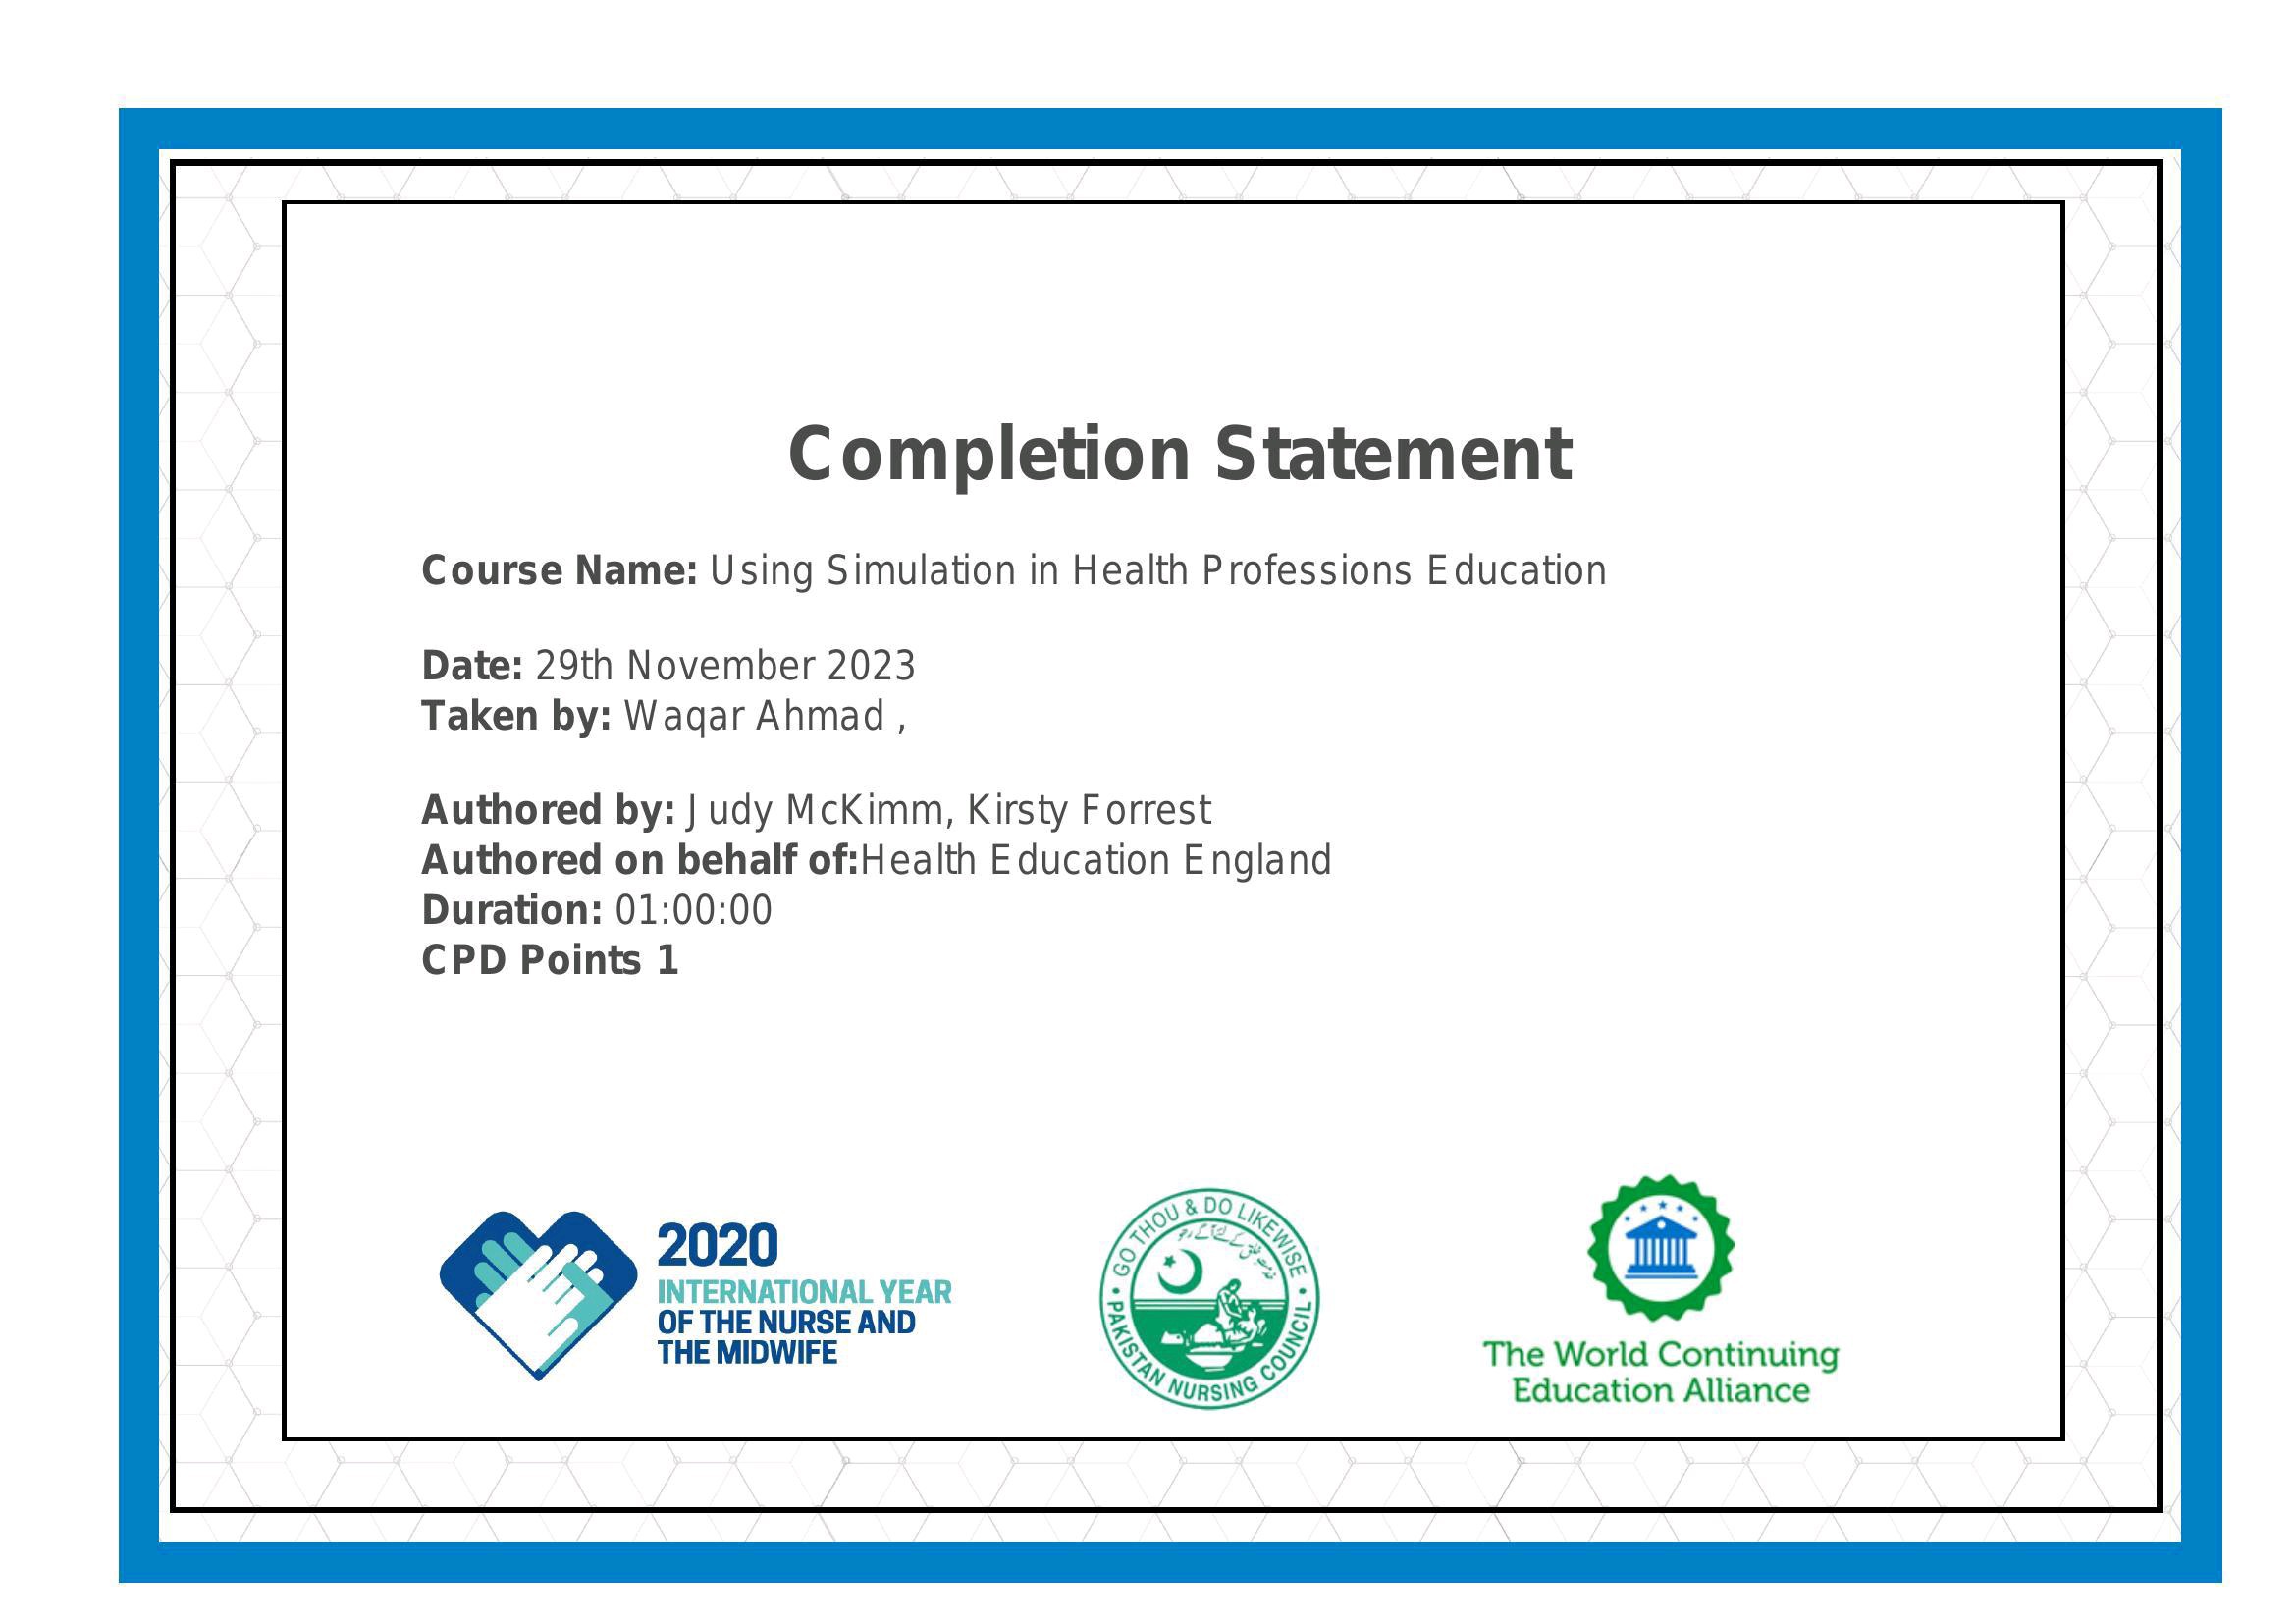 Completion Statement

Course Name: Using Simulation in Health Professions Education

Date: 29th November 2023
Taken by: Wagar Ahmad ,

Authored by: | udy McKimm, Kirsty Forrest
Authored on behalf of:Health Education England
Duration: 01:00:00

CPD Points 1

INTERNATIONAL YEAR :

OF THE NURSE AND Ry

THE MIDWIFE : The World Continuing
Education Alliance